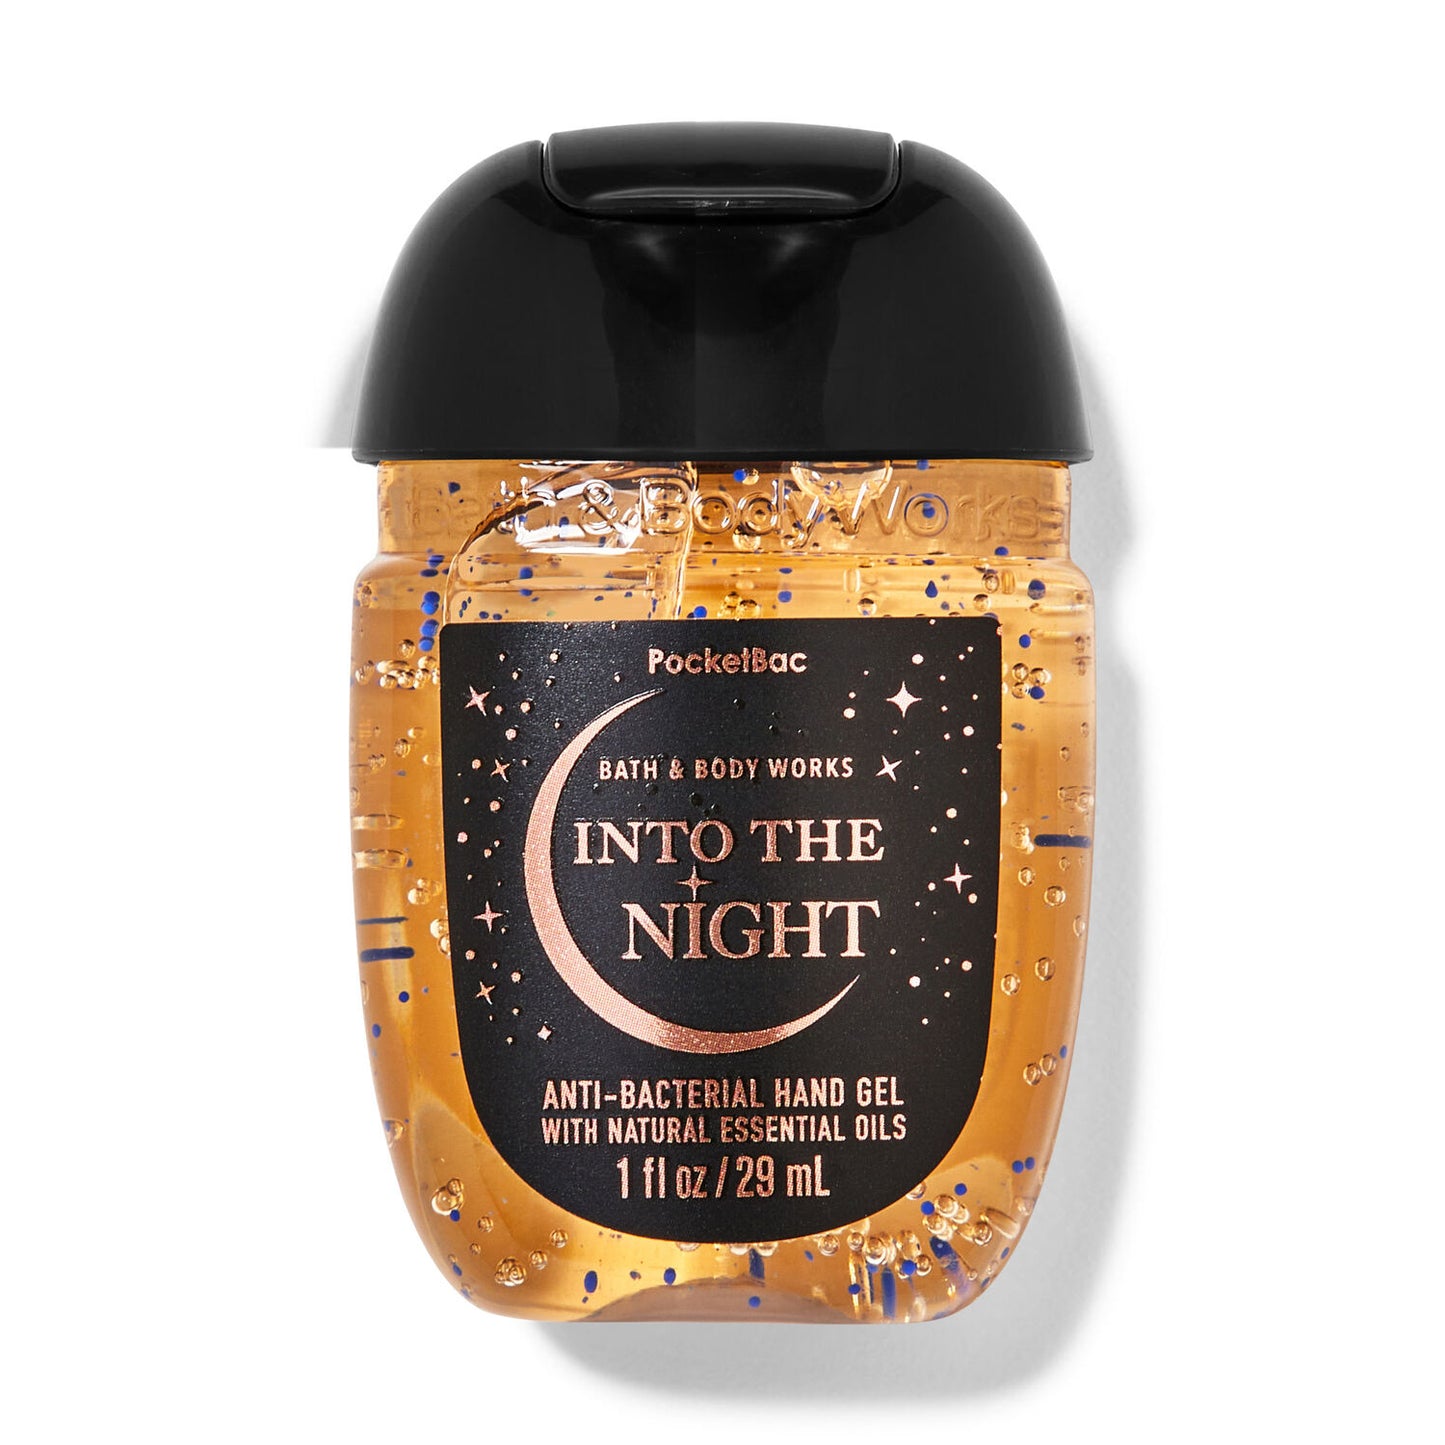 shop bath and body works sanitizer in into the night fragrance available at heygirl.pk for delivery in Pakistan